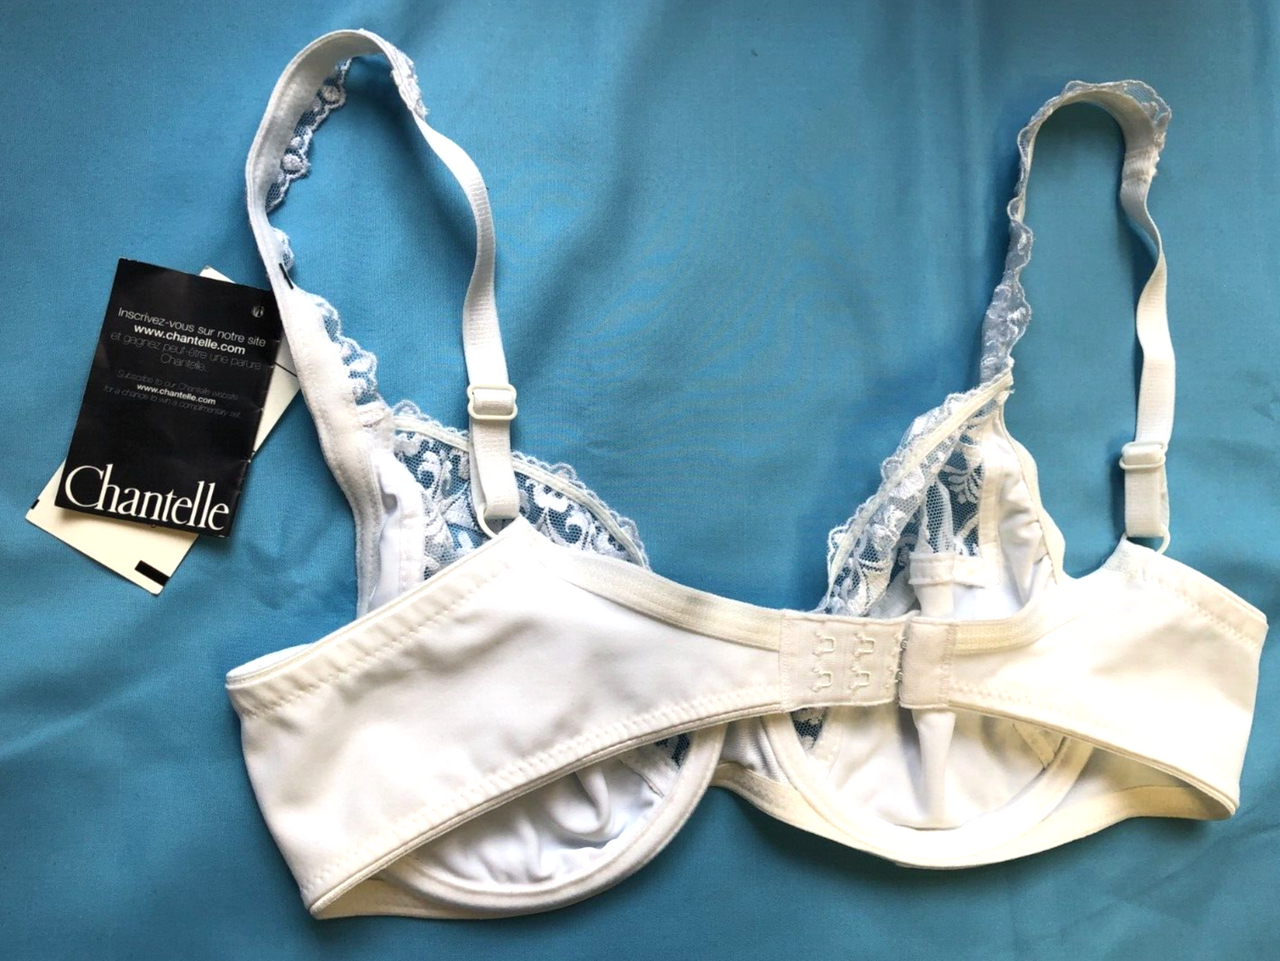 Chantelle Bra 32C White Full Cup Underwired Non Padded 2351 New